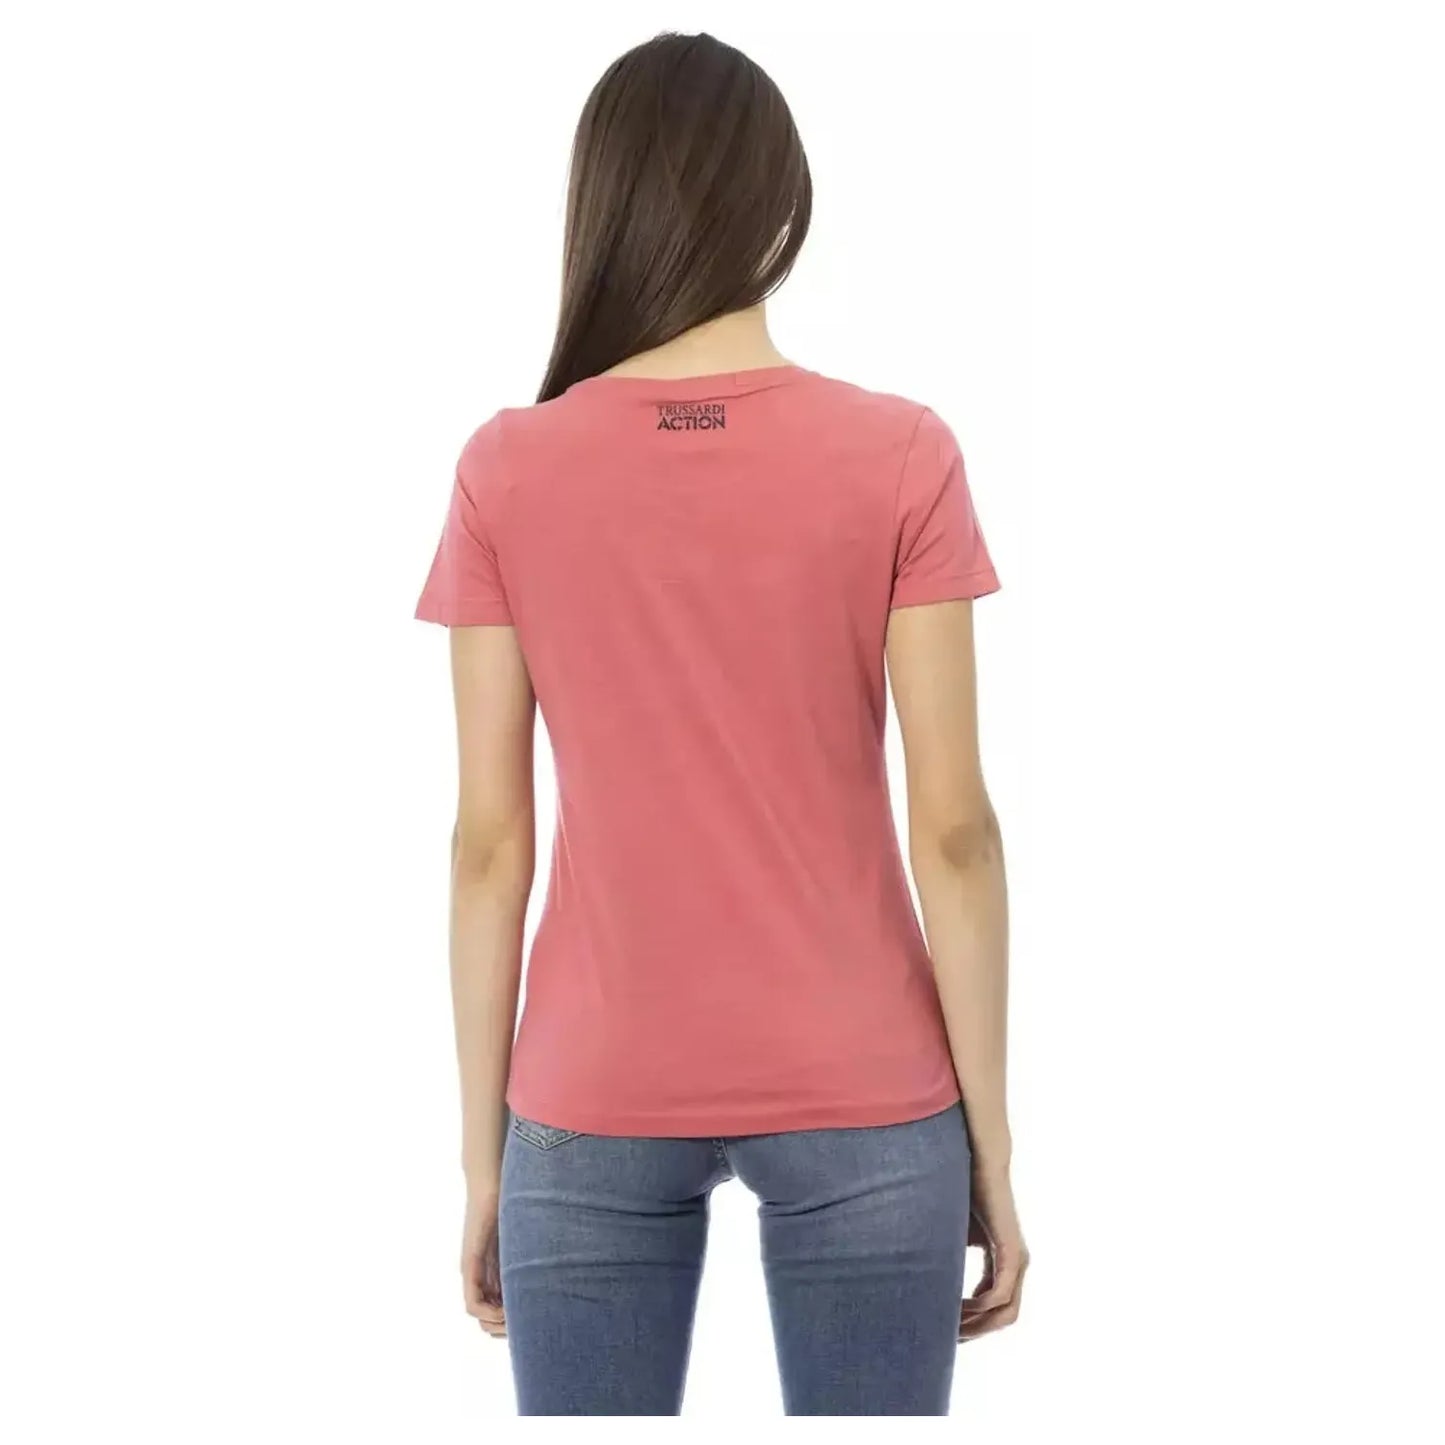 Trussardi Action Chic Pink Print Tee for Trendy Summer Looks pink-cotton-tops-t-shirt-44